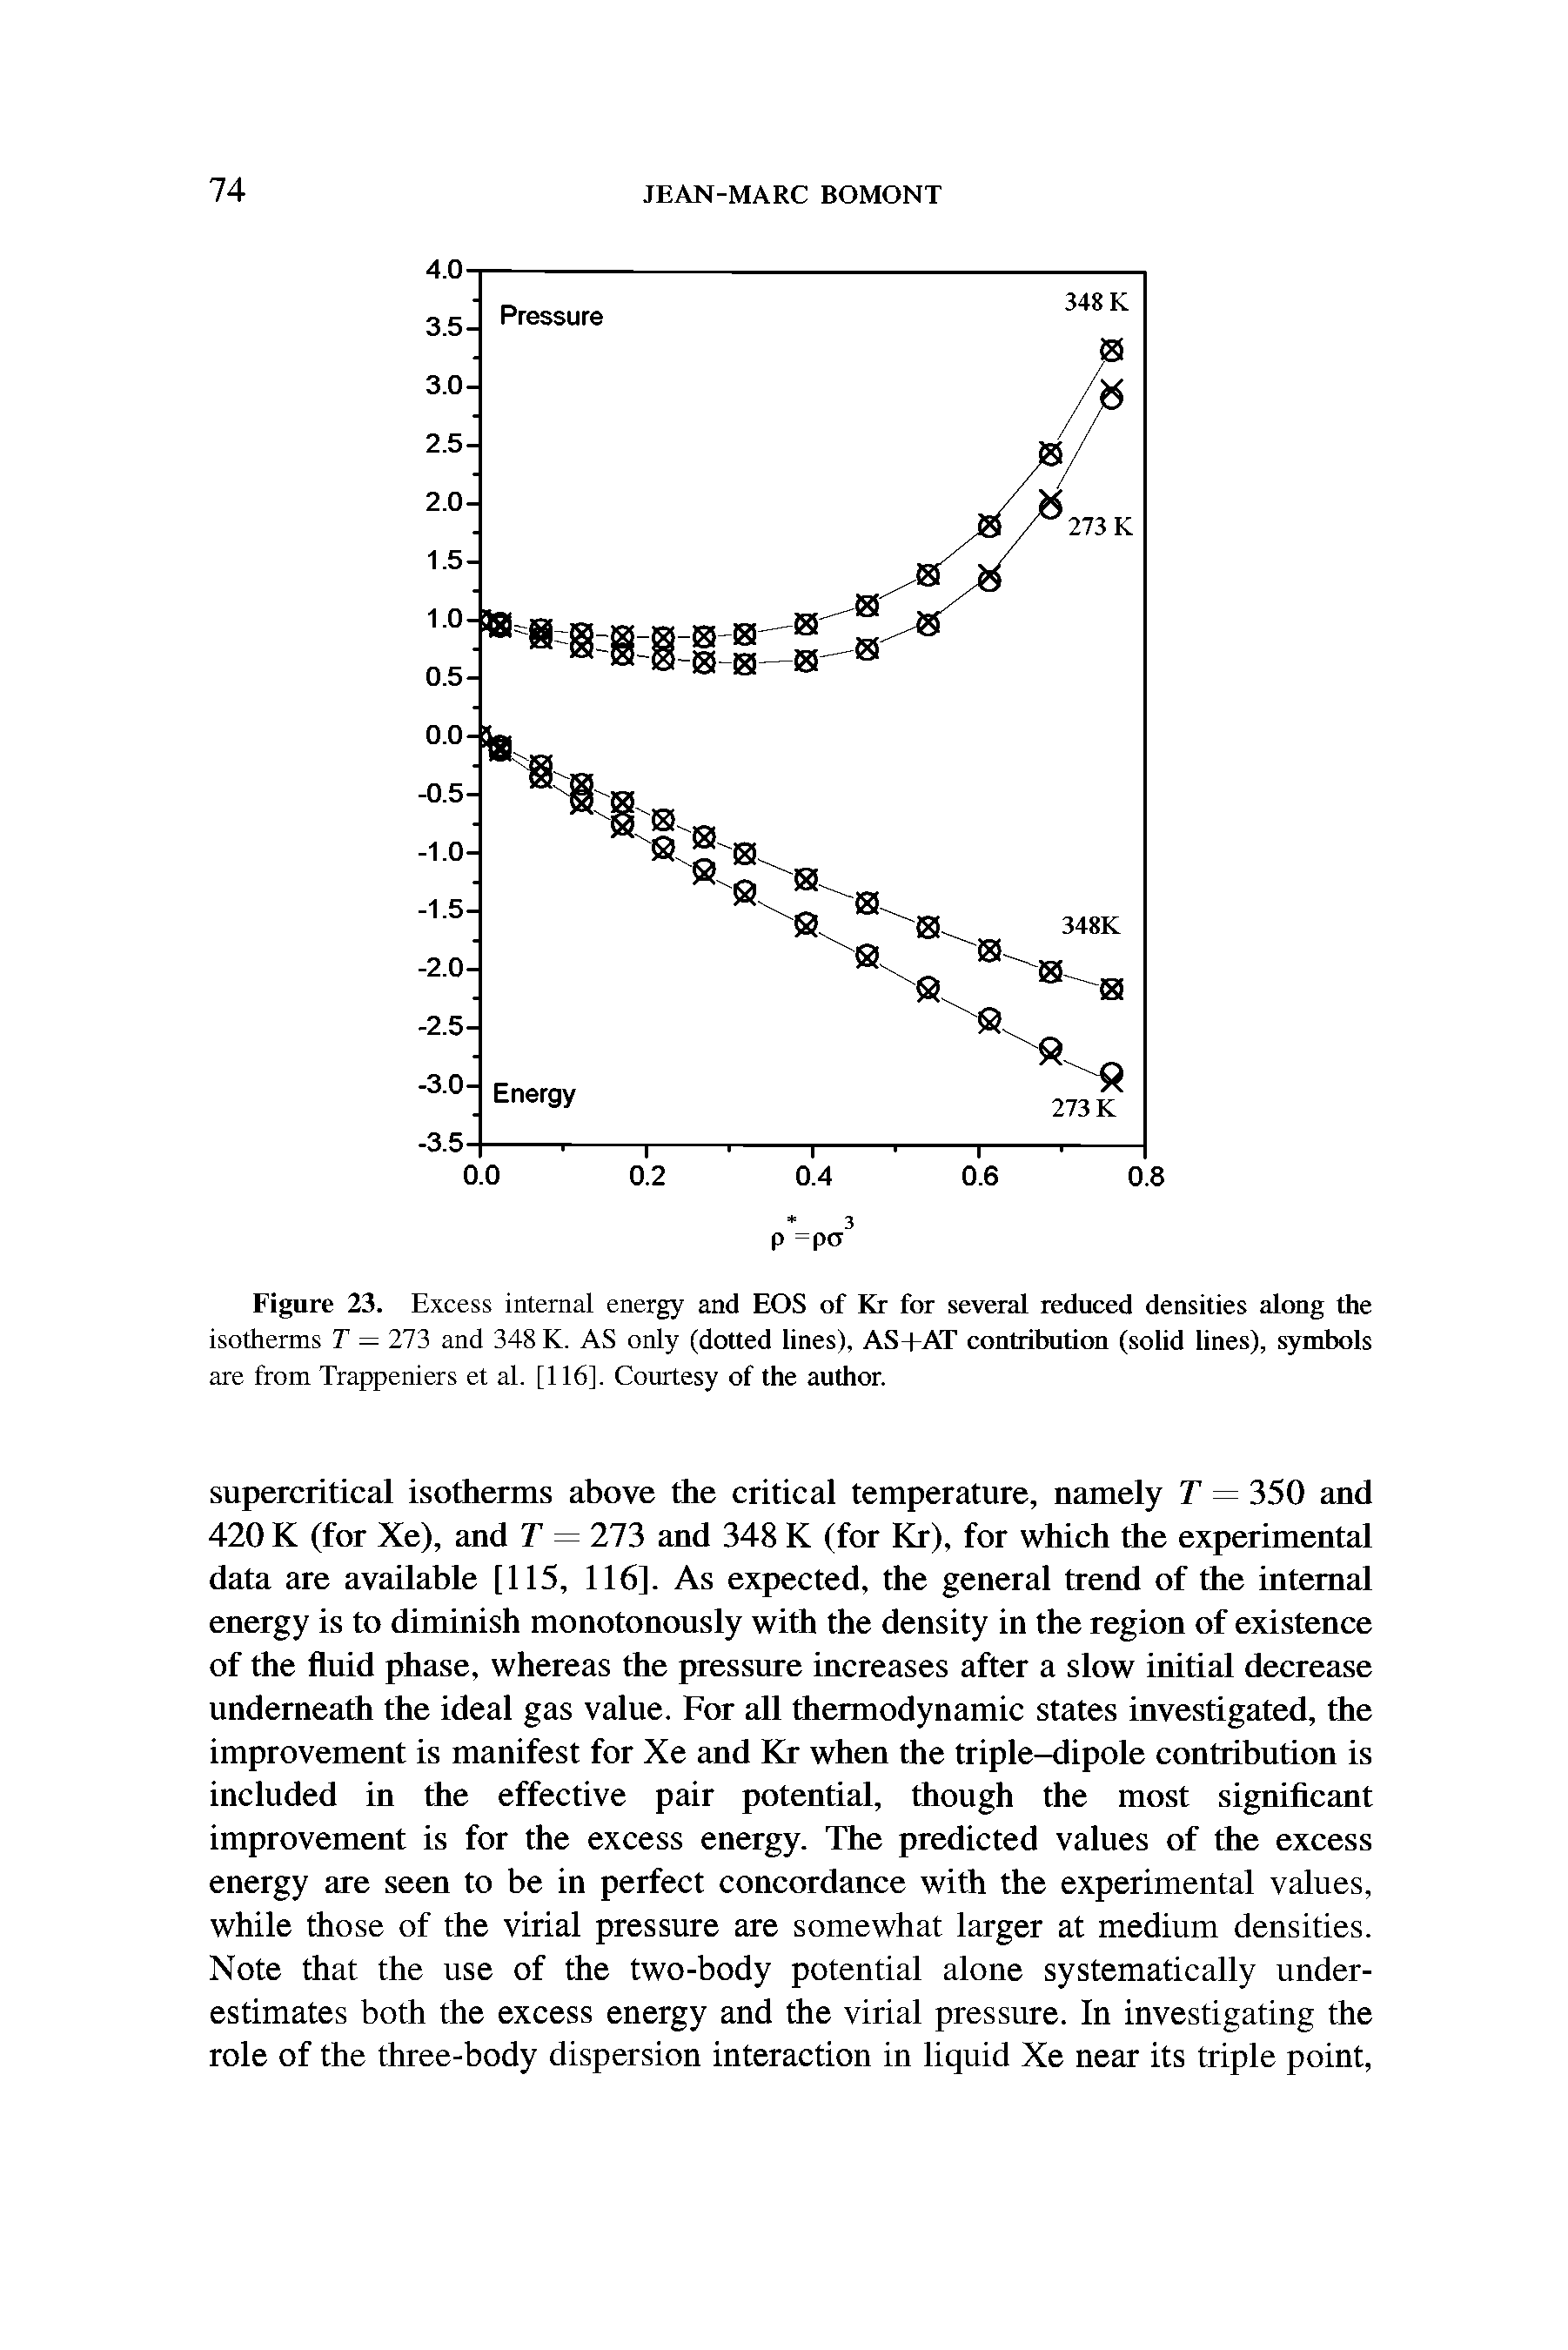 Figure 23. Excess internal energy and EOS of Kr for several reduced densities along the isotherms T = 273 and 348 K. AS only (dotted lines), AS+AT contribution (solid lines), symbols...